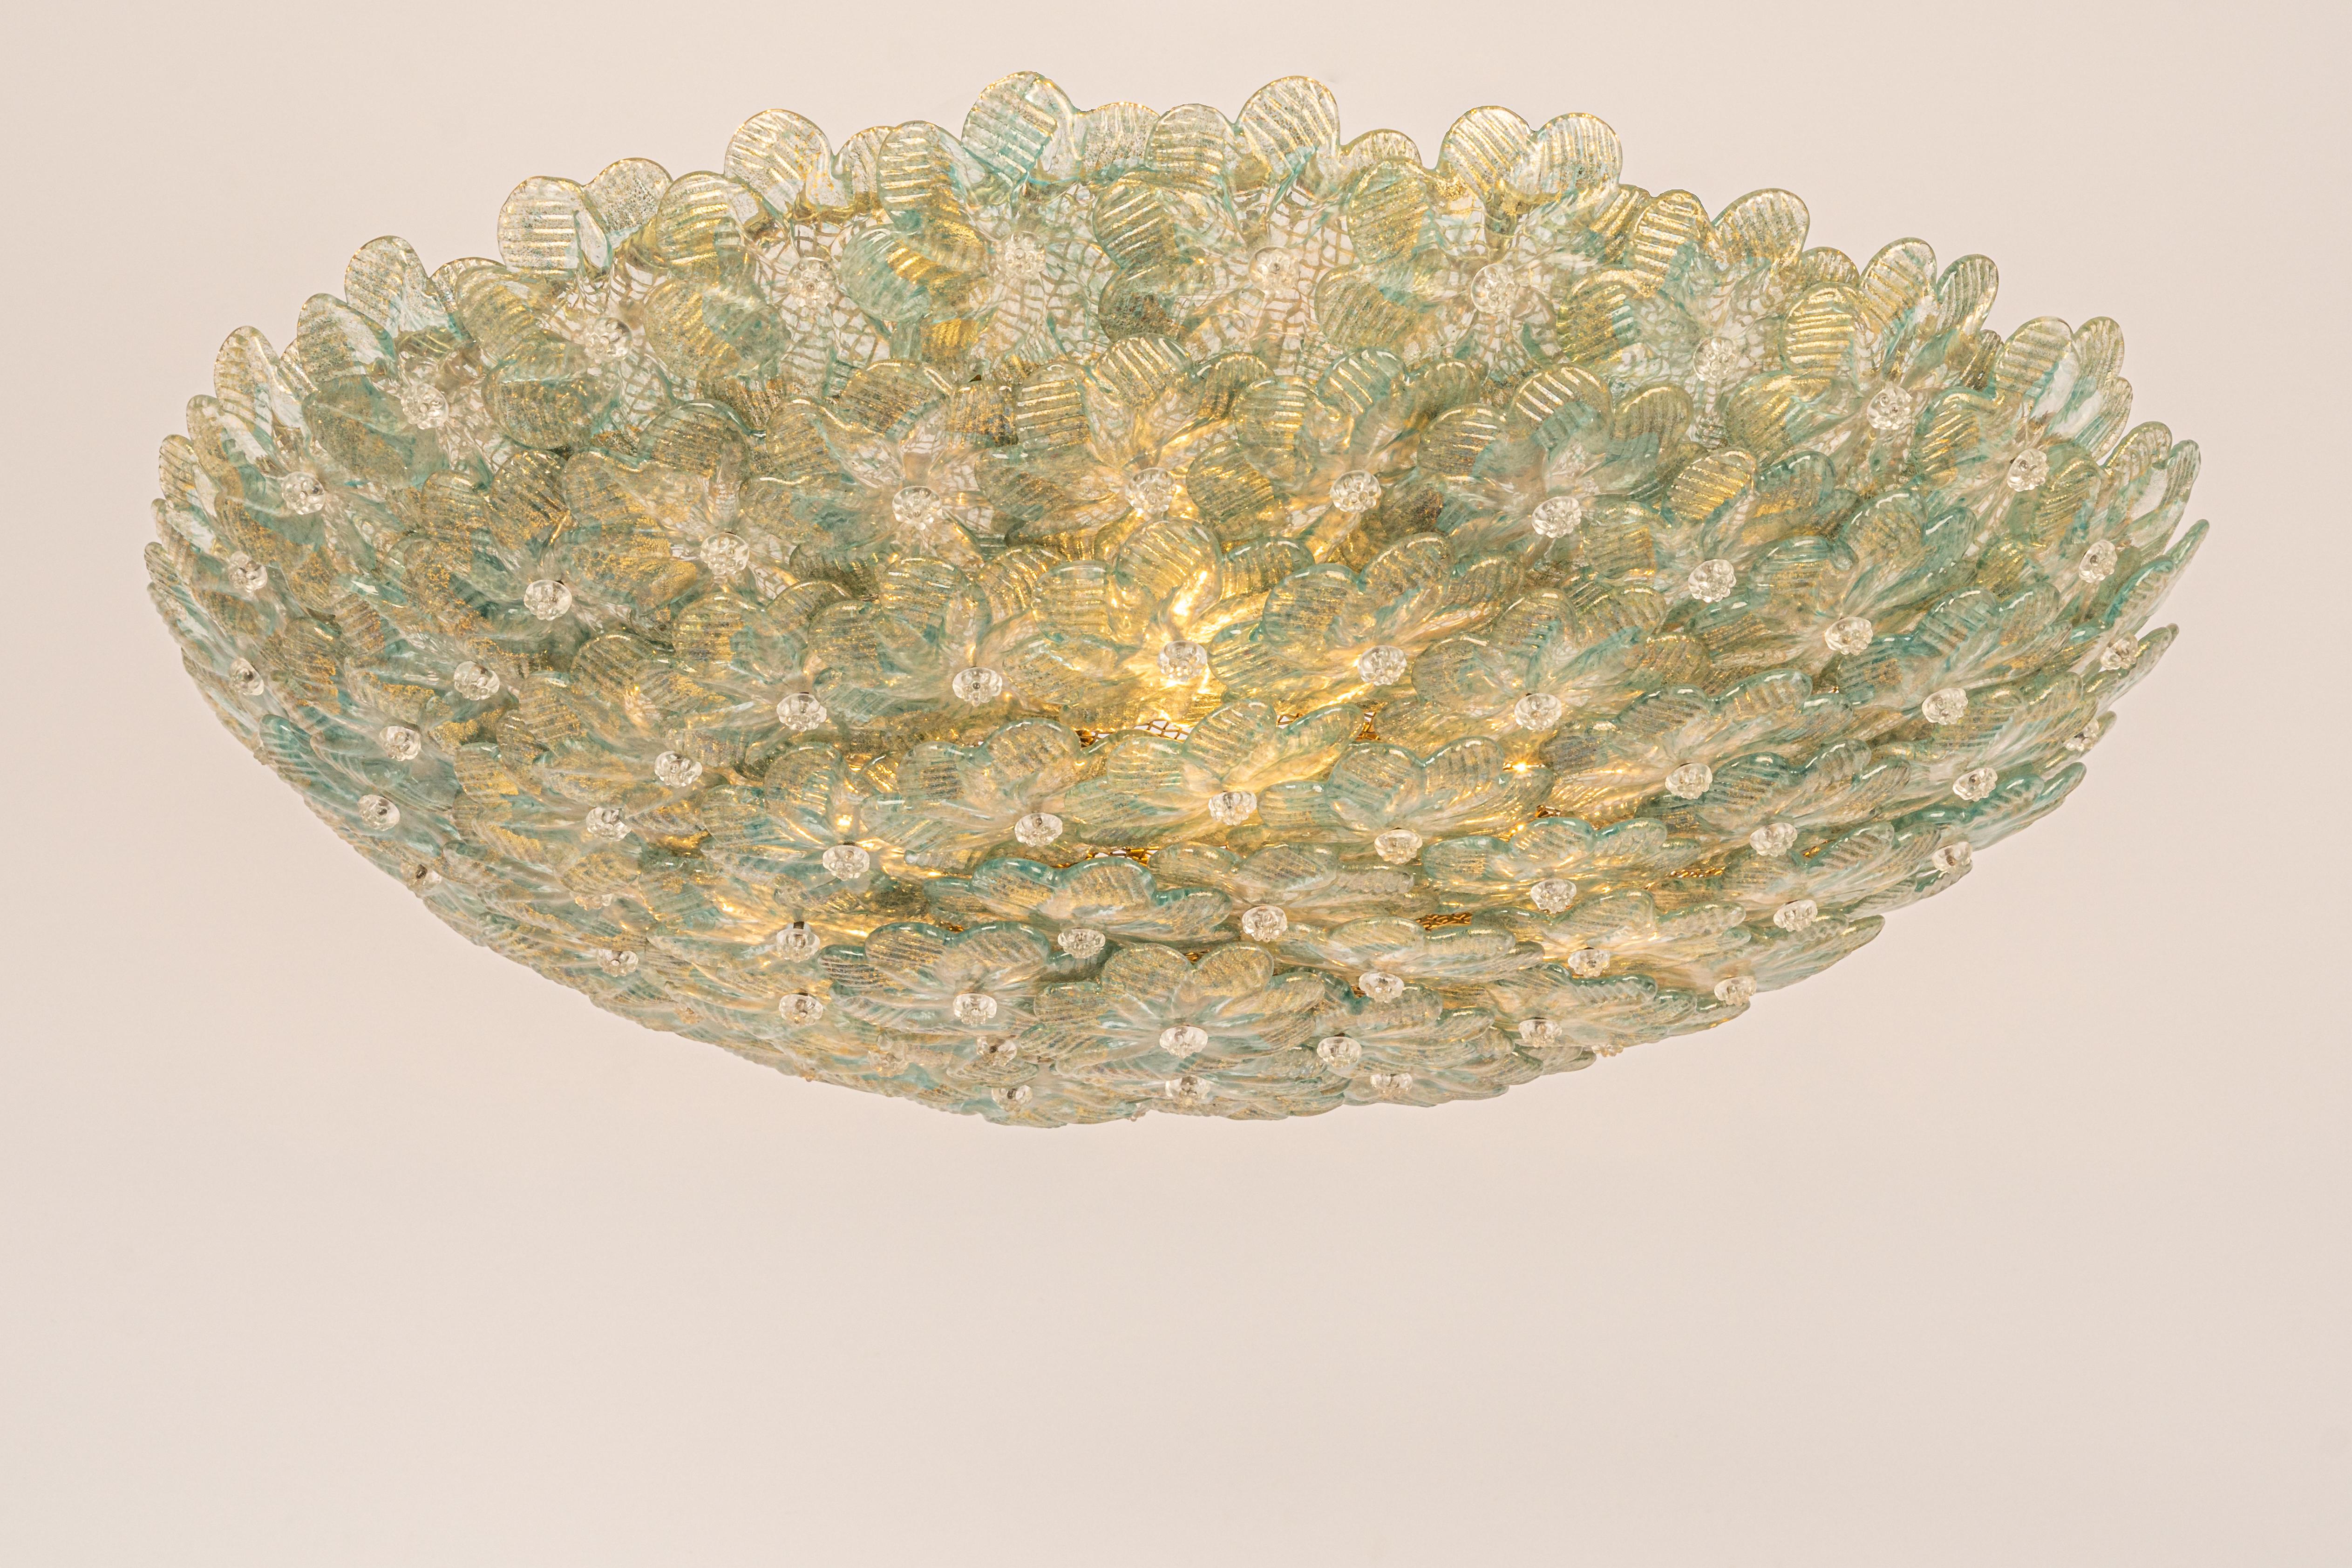 Midcentury Green Murano Glass Ceiling Fixture by Barovier & Toso, Italy, 1960s For Sale 2